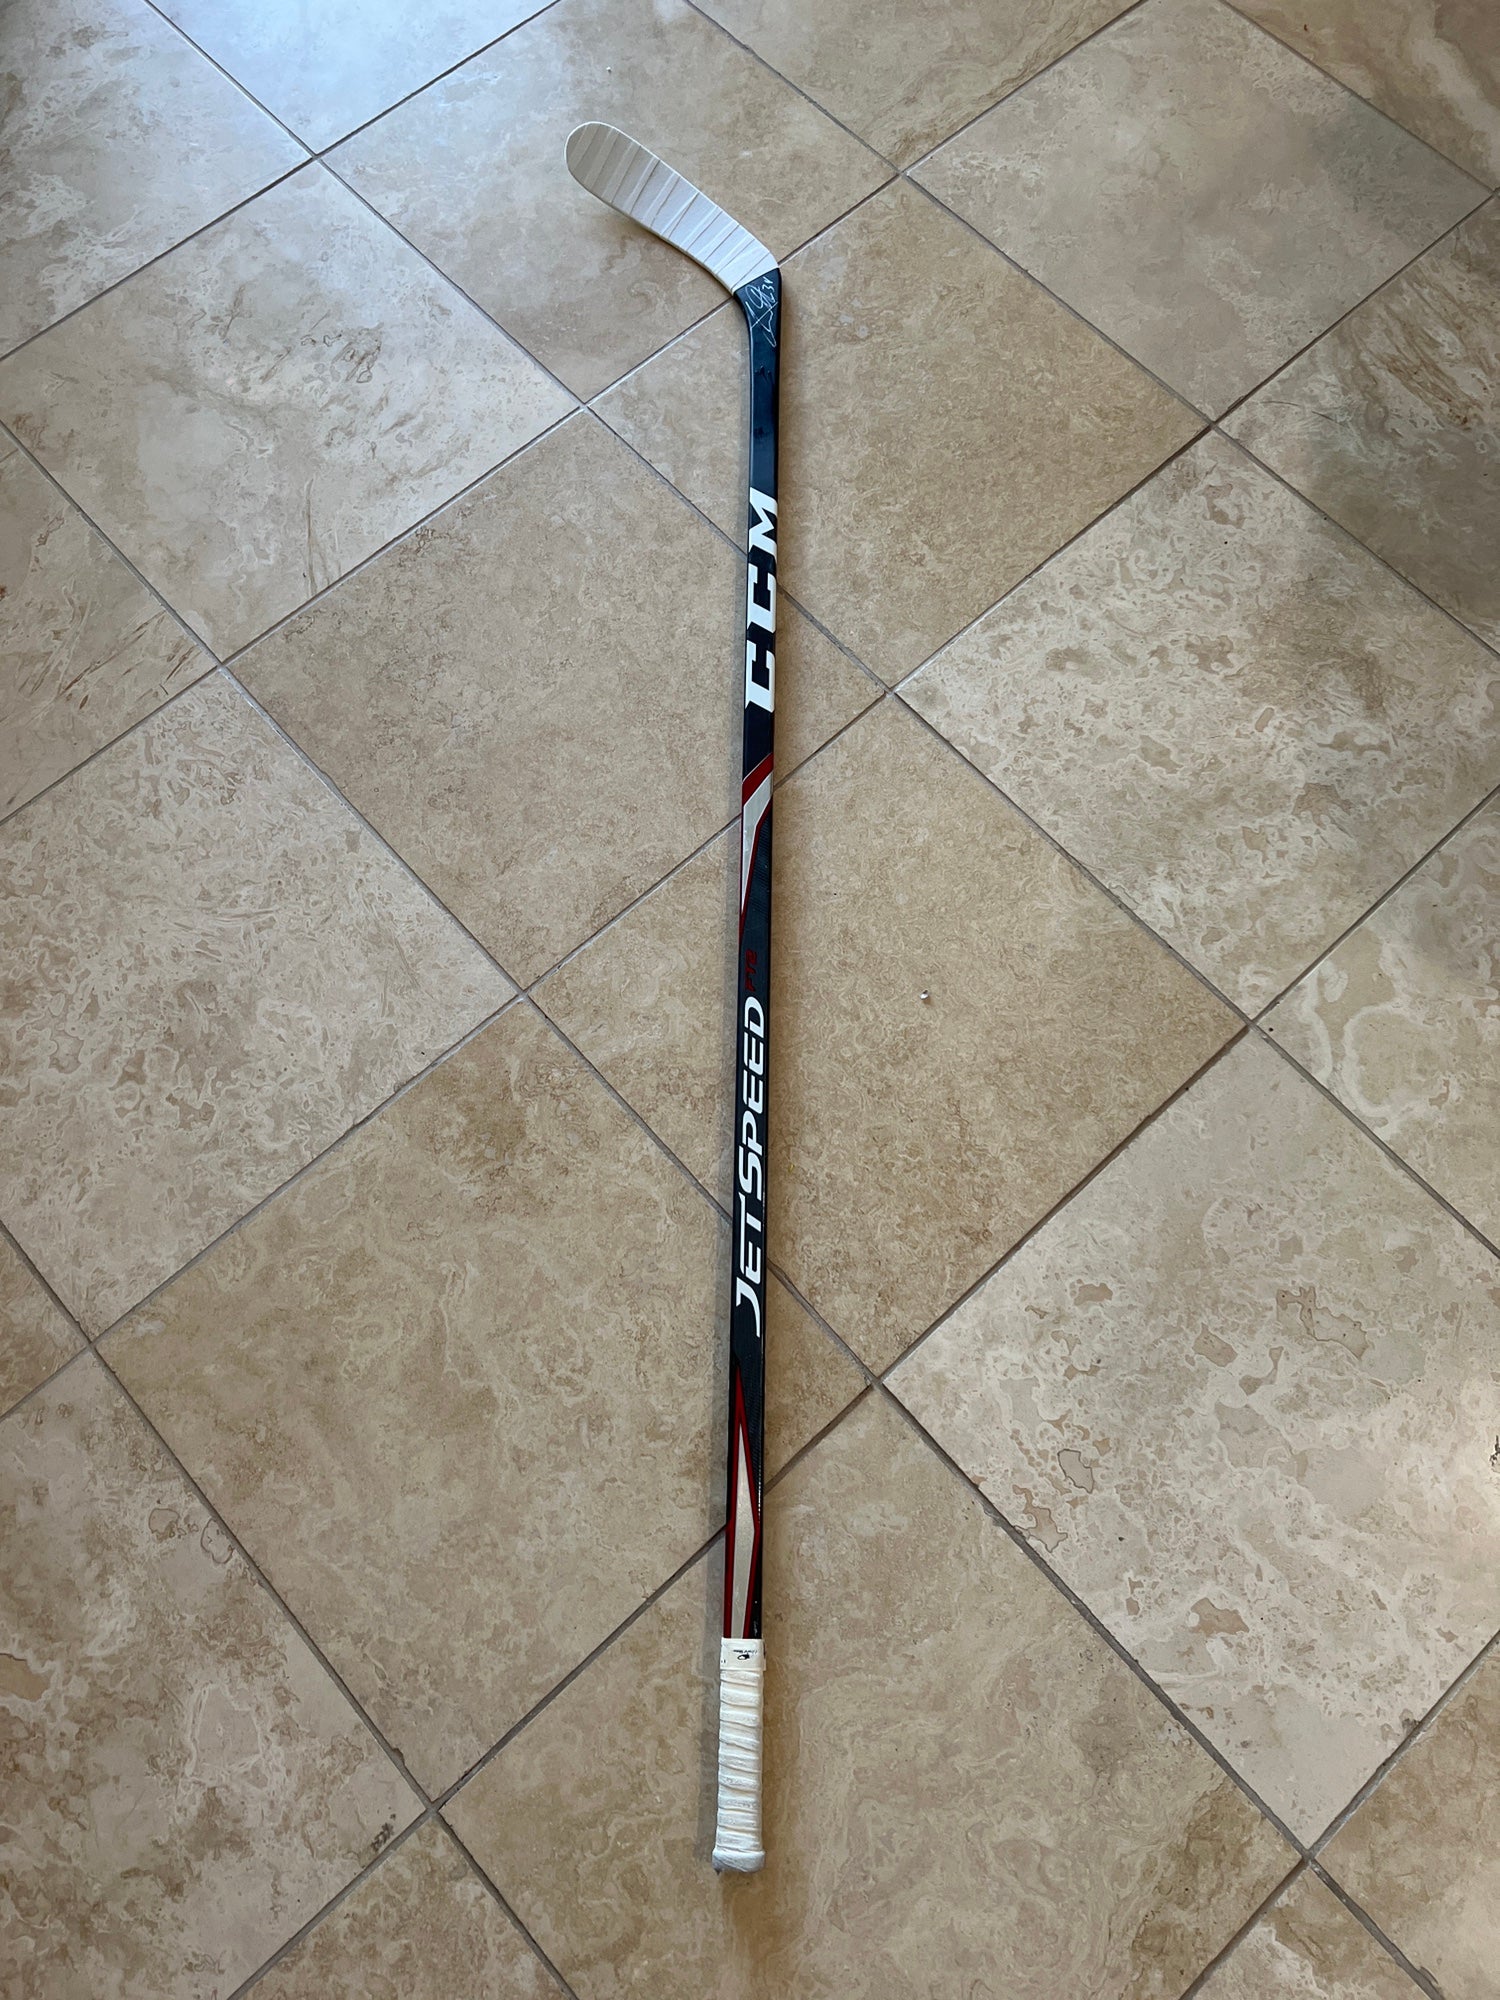 34 Auston Matthews Game Used Stick - Autographed - Toronto Maple Leafs -  NHL Auctions